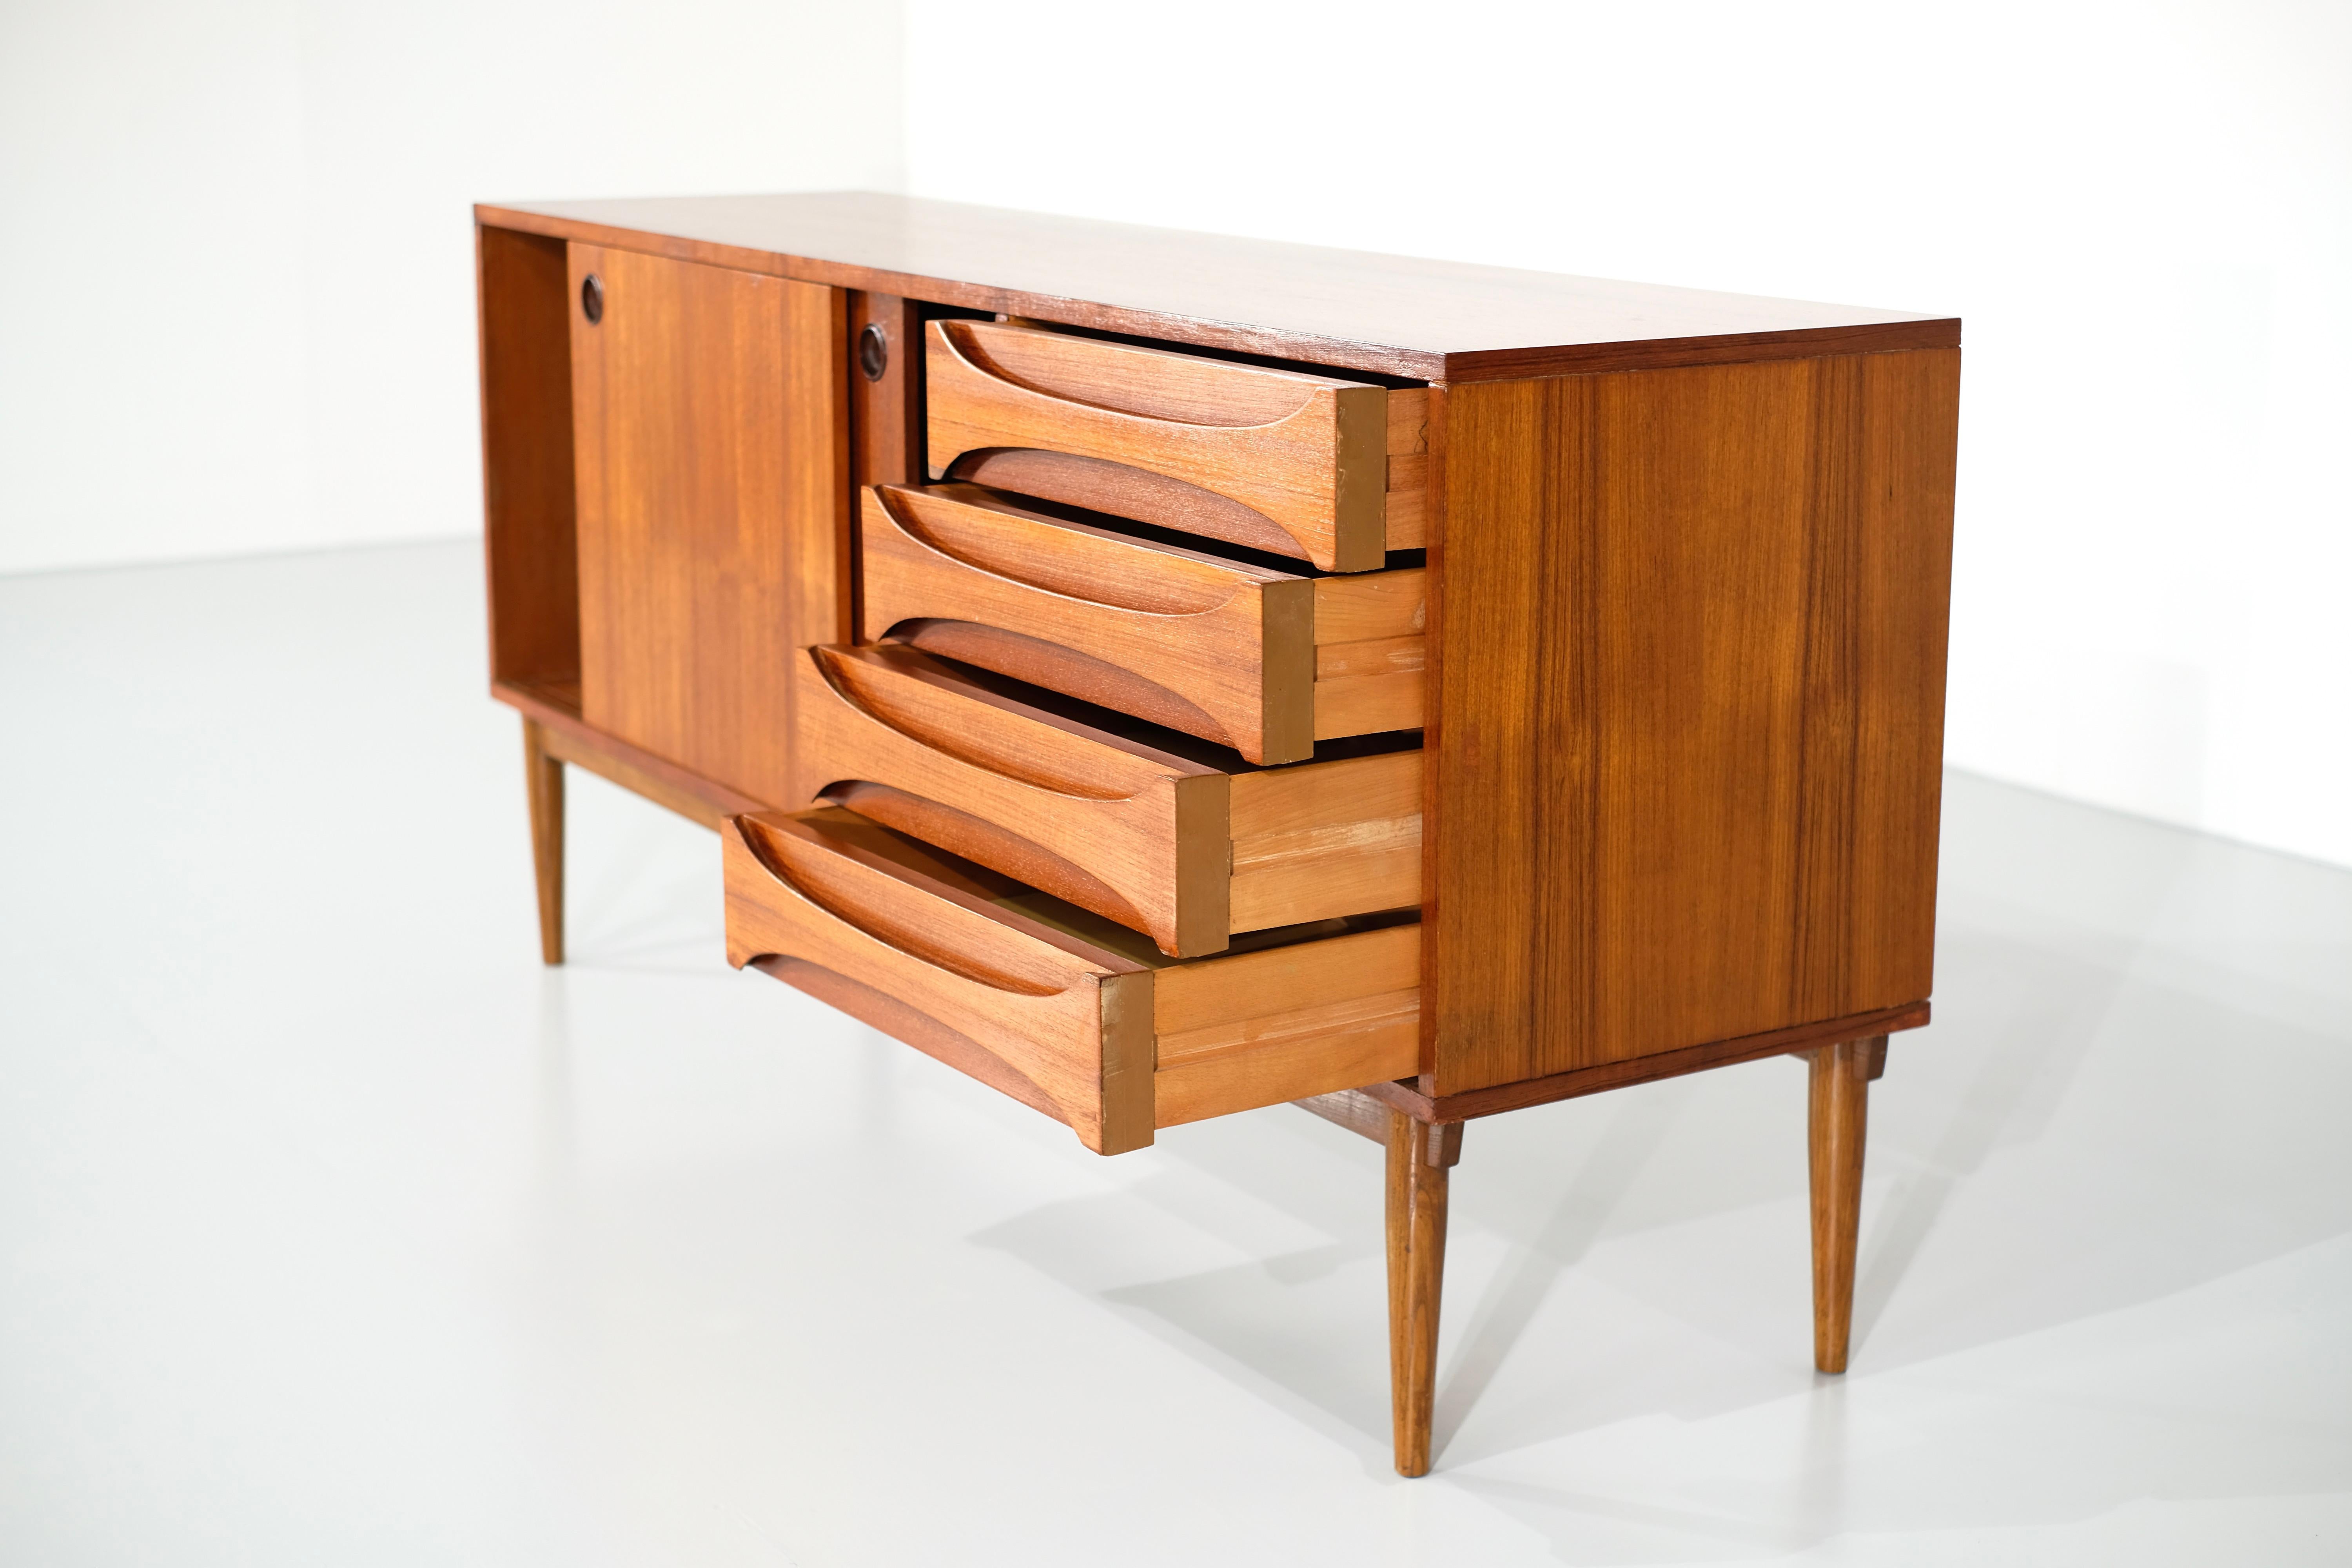  Sideboard in Wood medium size 1960's In Good Condition For Sale In Lot/Drogenbos, BE